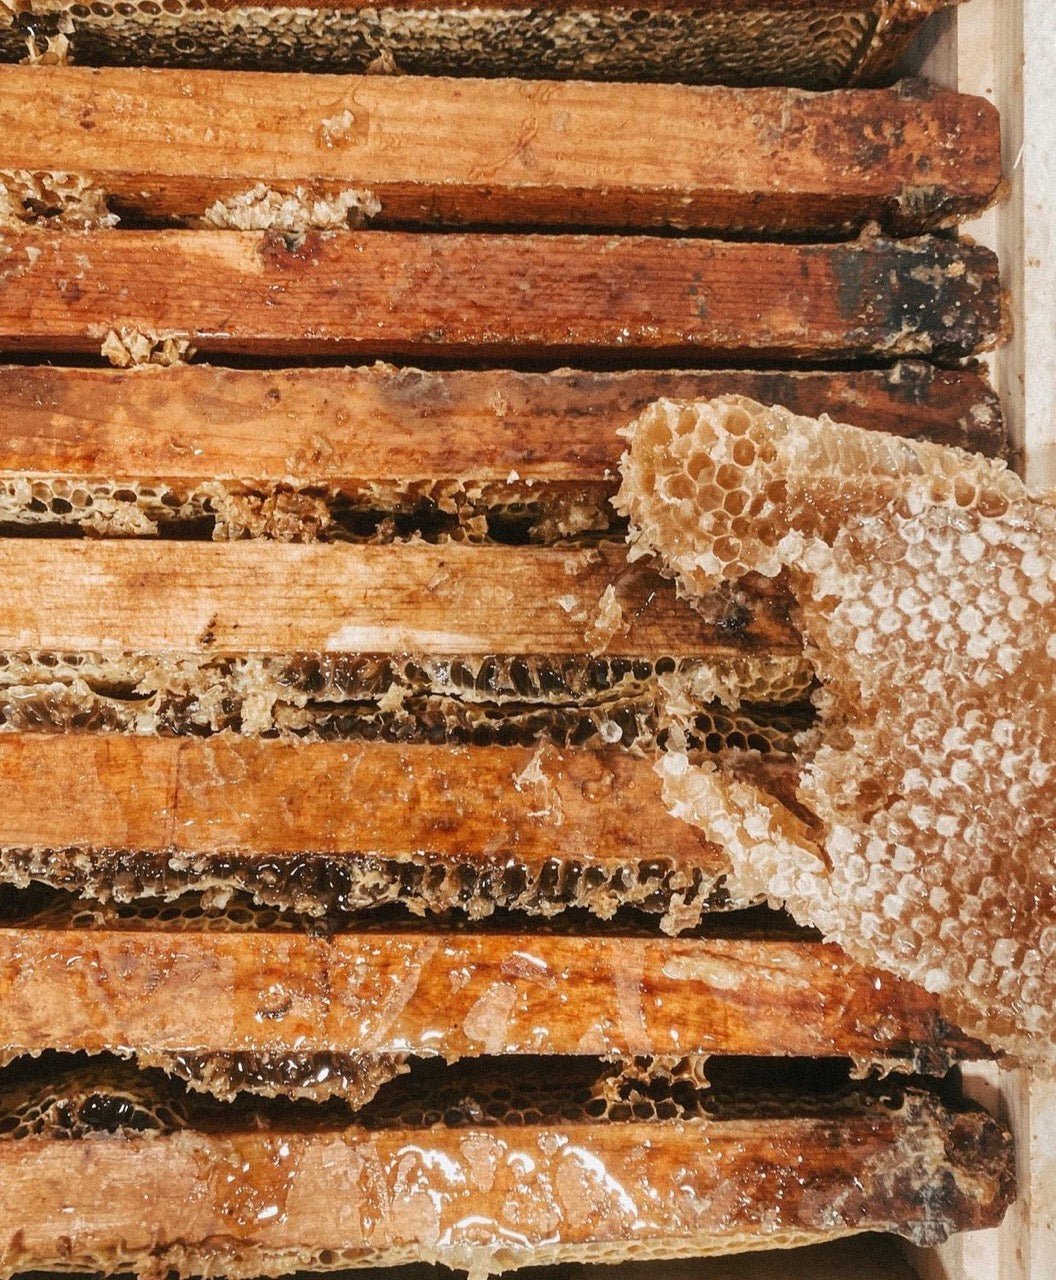 Where our beeswax comes from